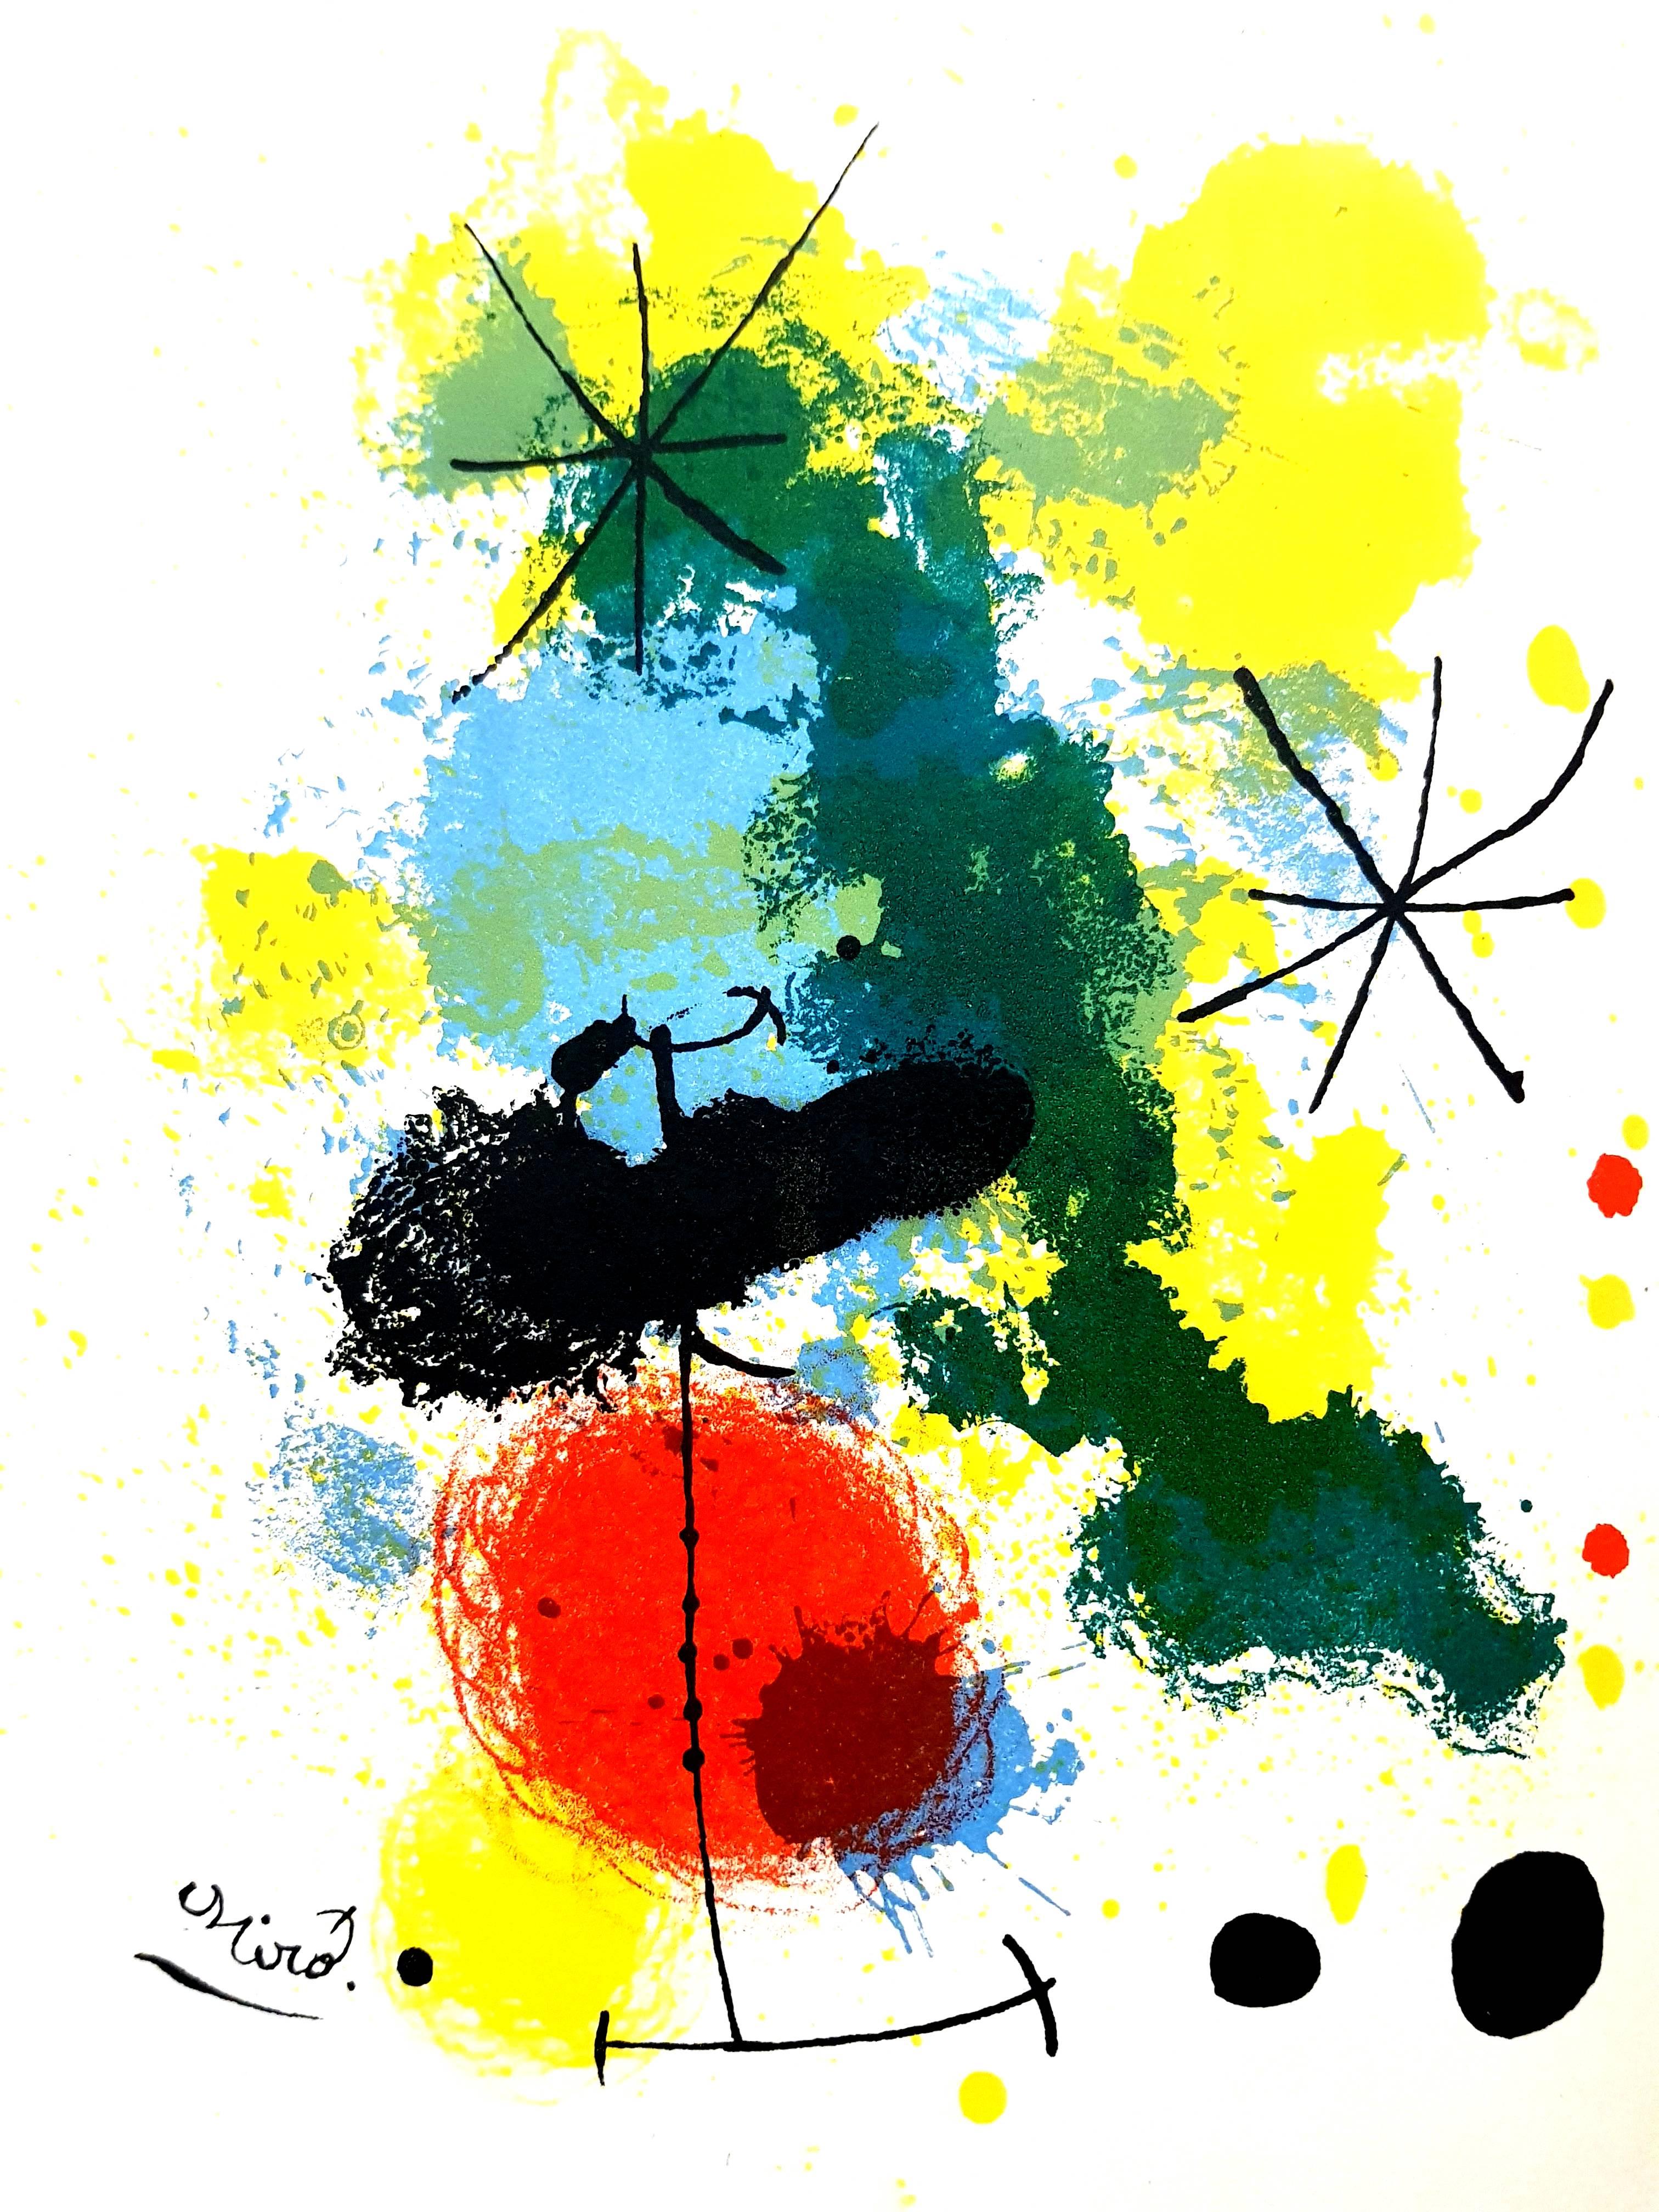 Joan Miró Abstract Print - Frontispiece for "Prints from the Mourlot Press"